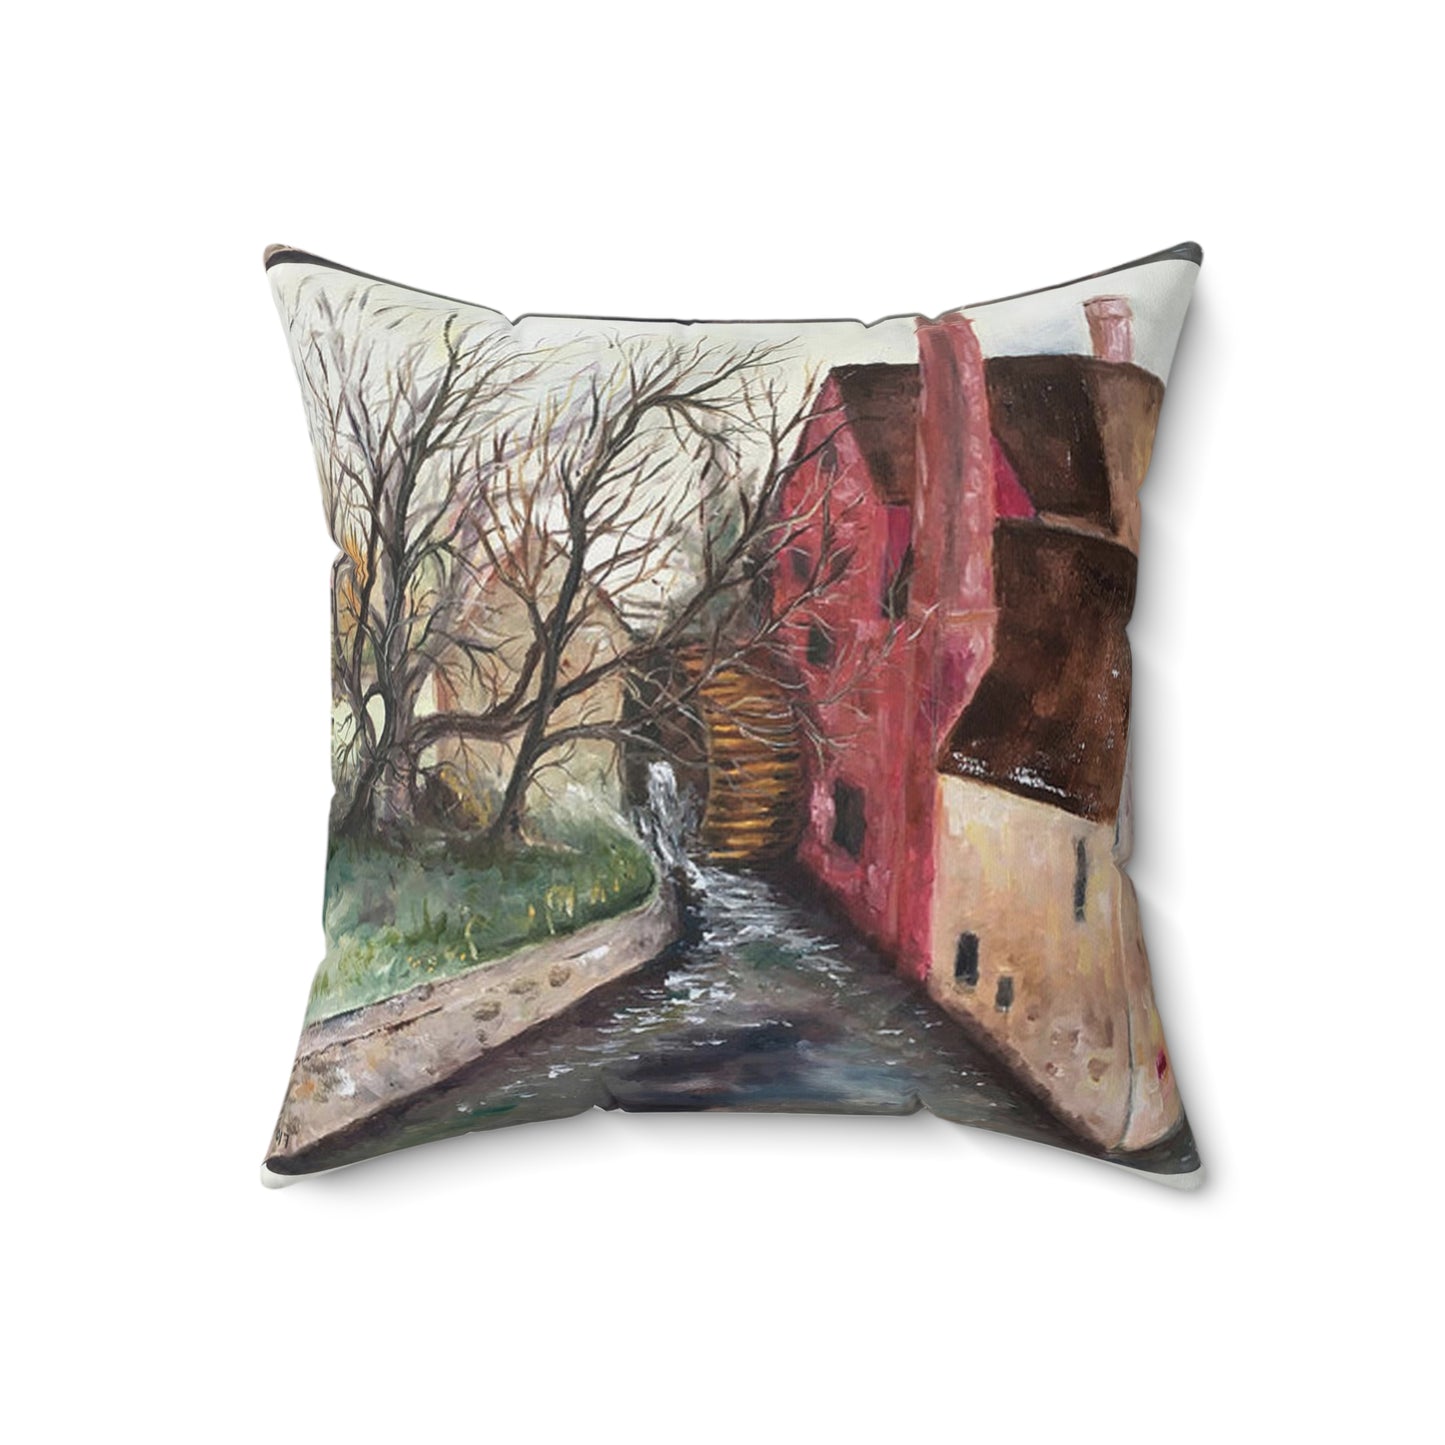 Waterwheel The Old Mill Cotswolds Indoor Spun Polyester Square Pillow